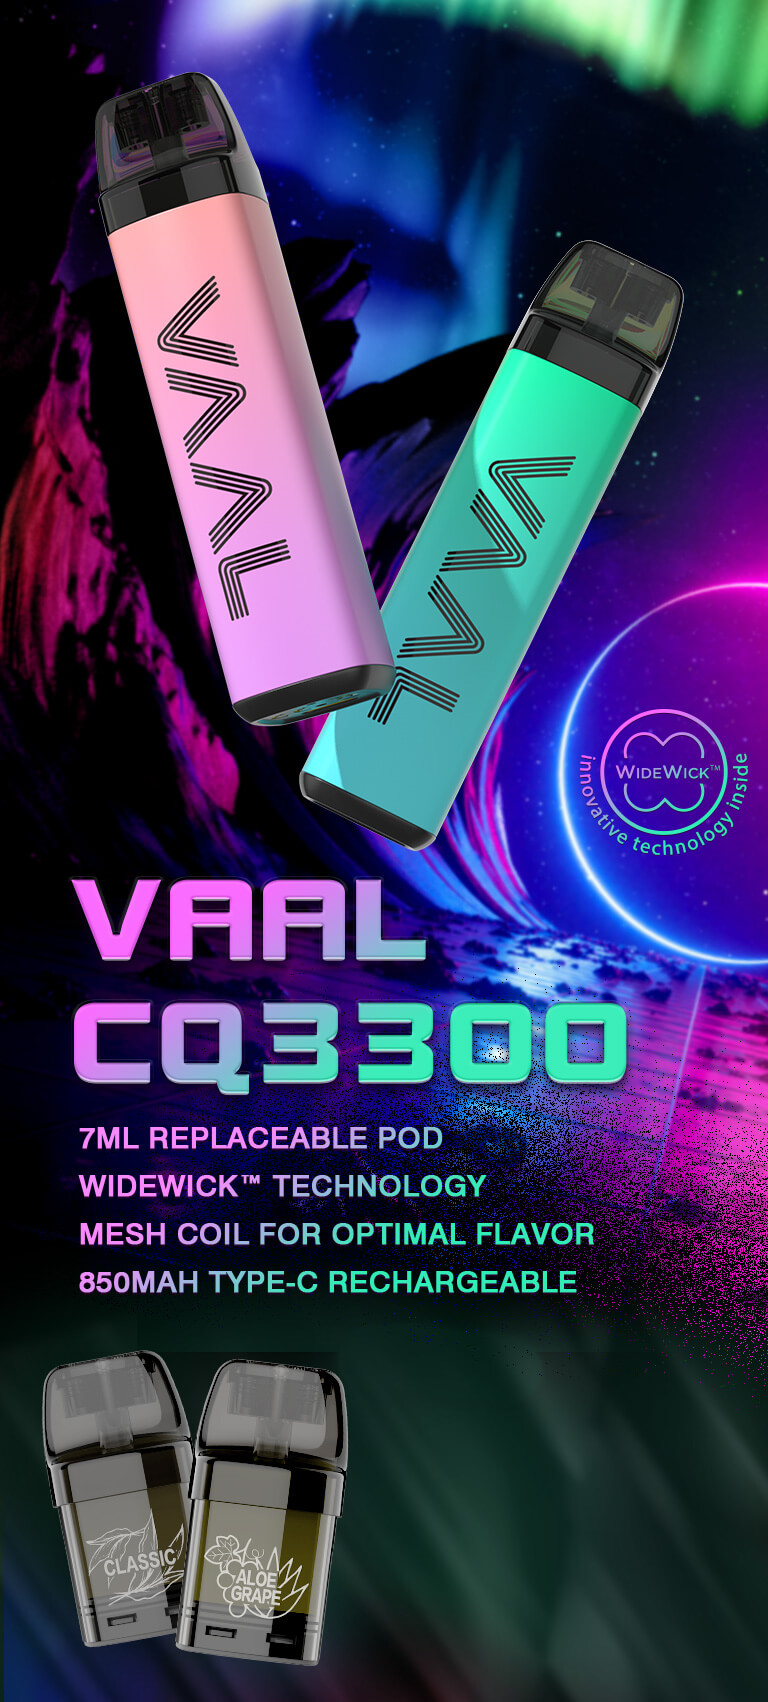 Along with the replaceable pod, Vaal CQ3300 will offer users a variety of options and you can easily choose your most enjoyable flavored pod.